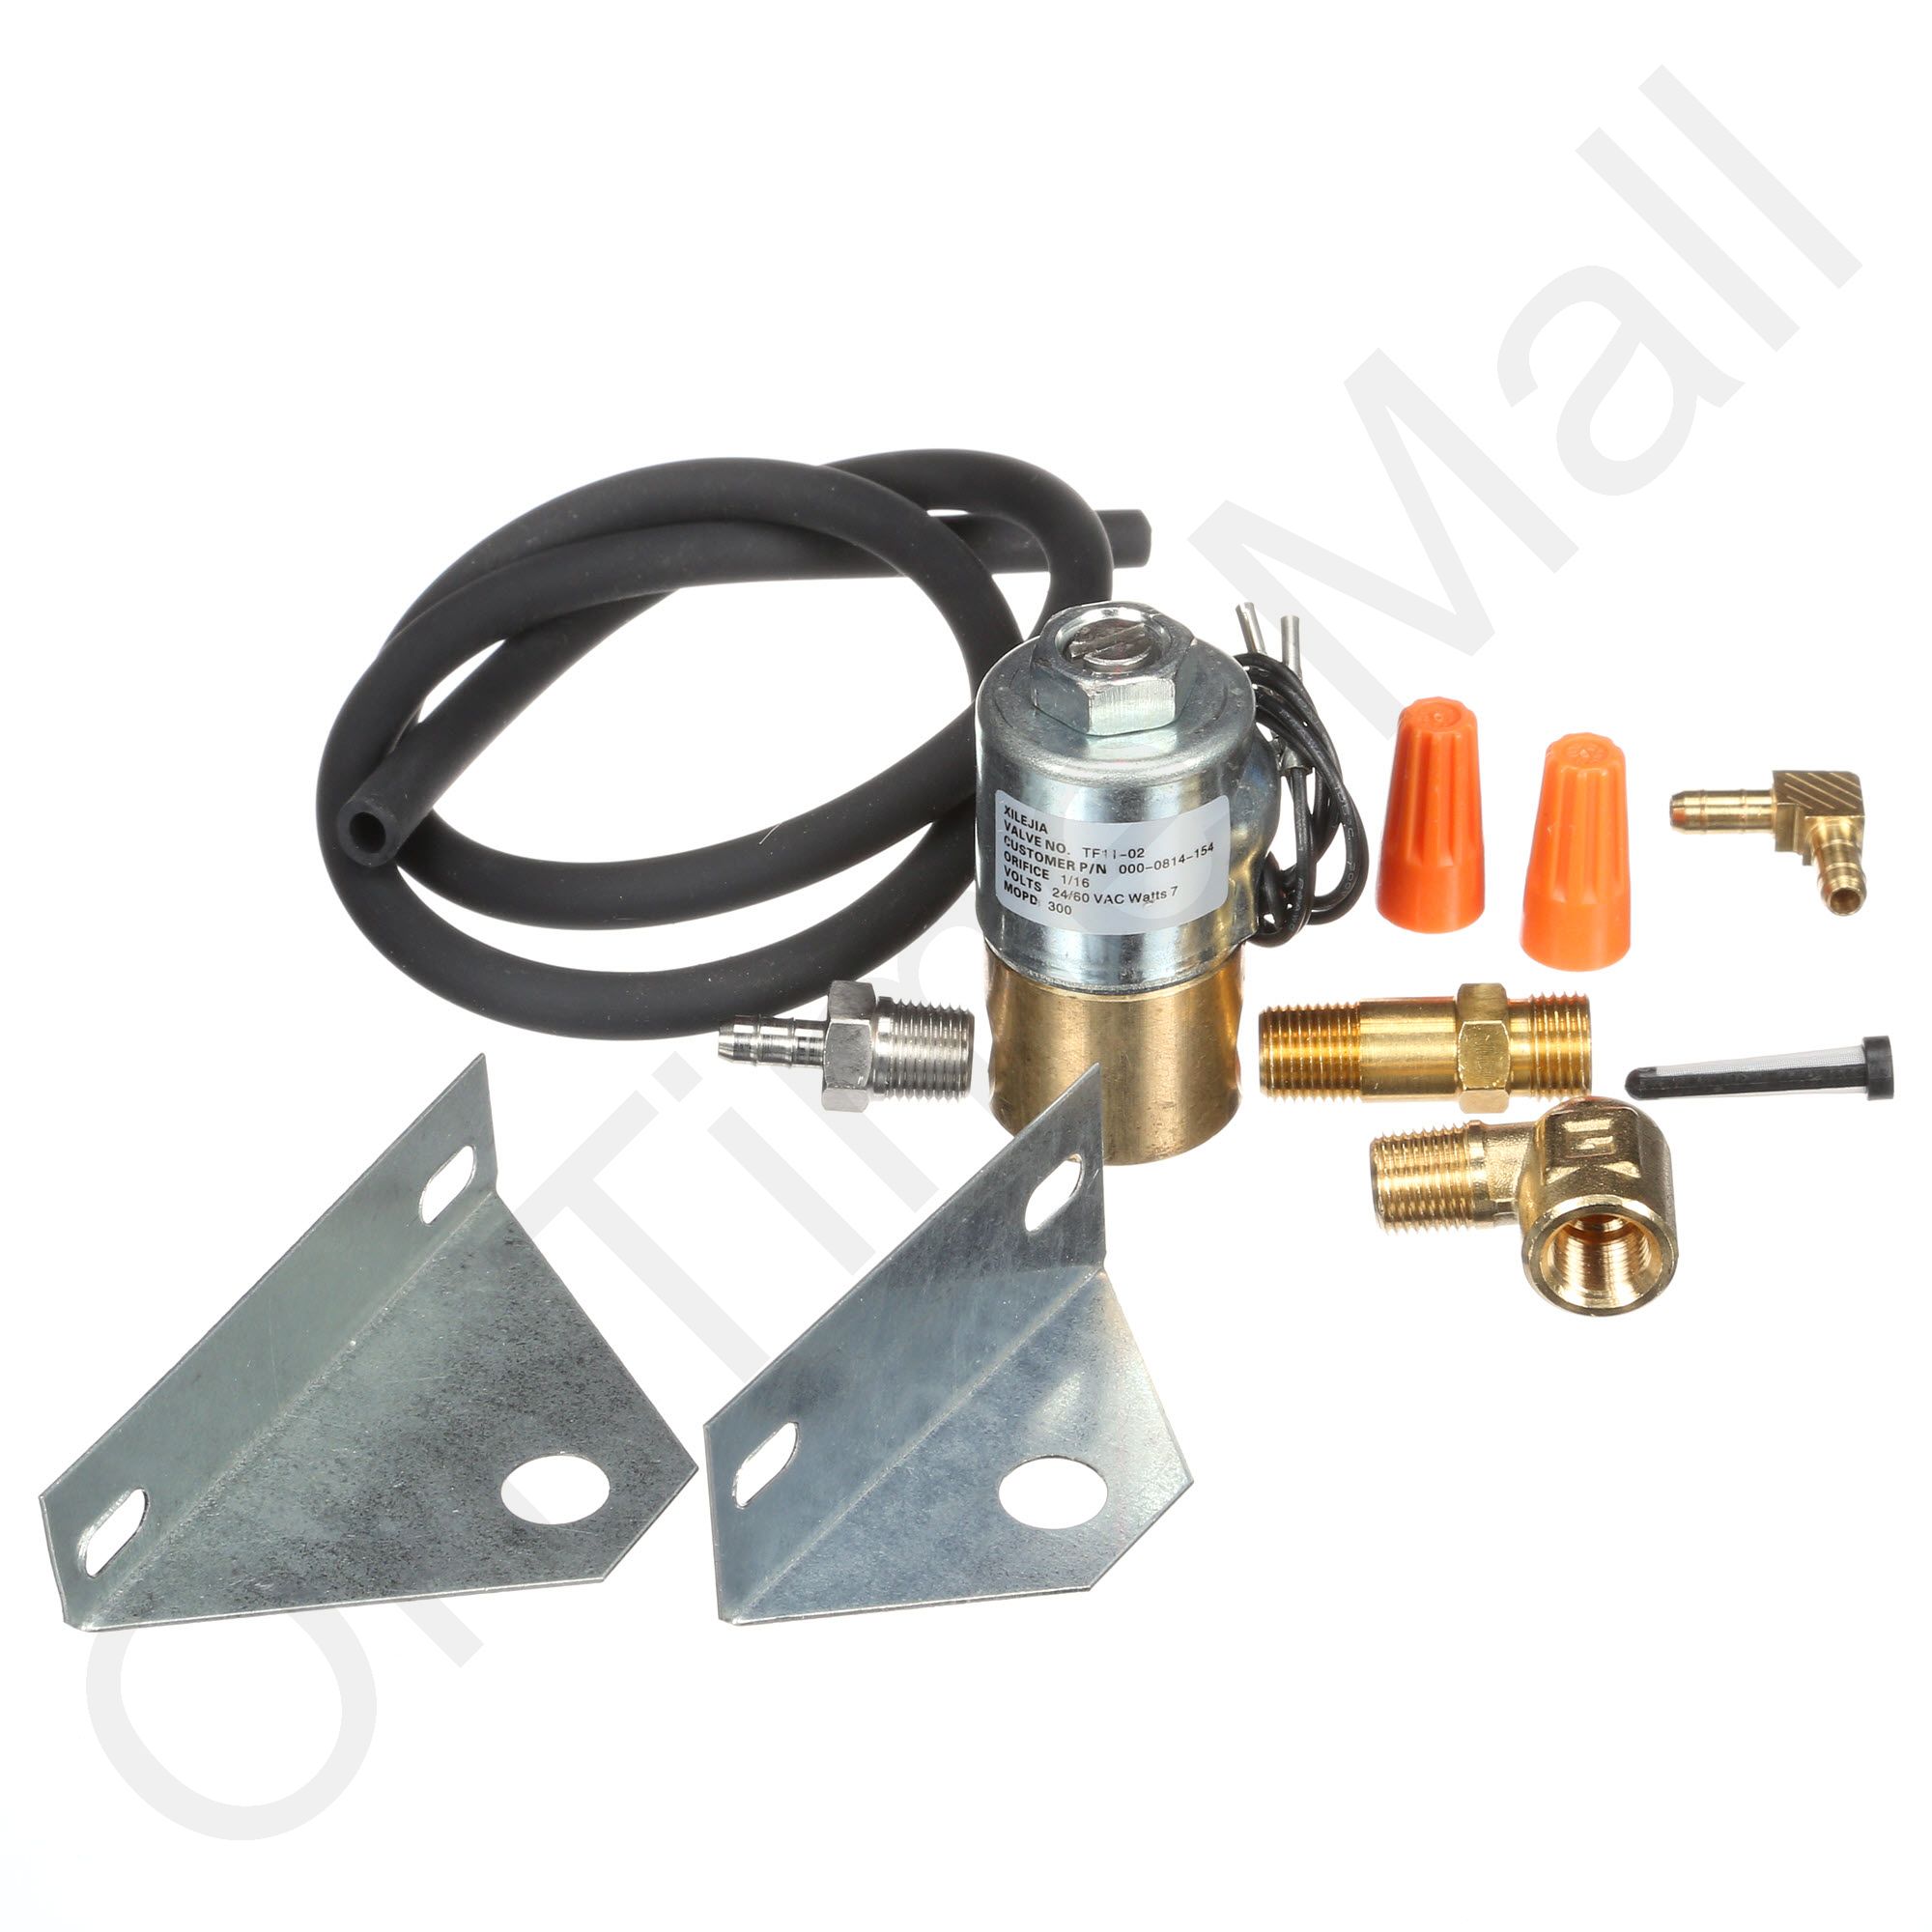 Replacement Solenoid Valve Hoover For Baumatic 10704